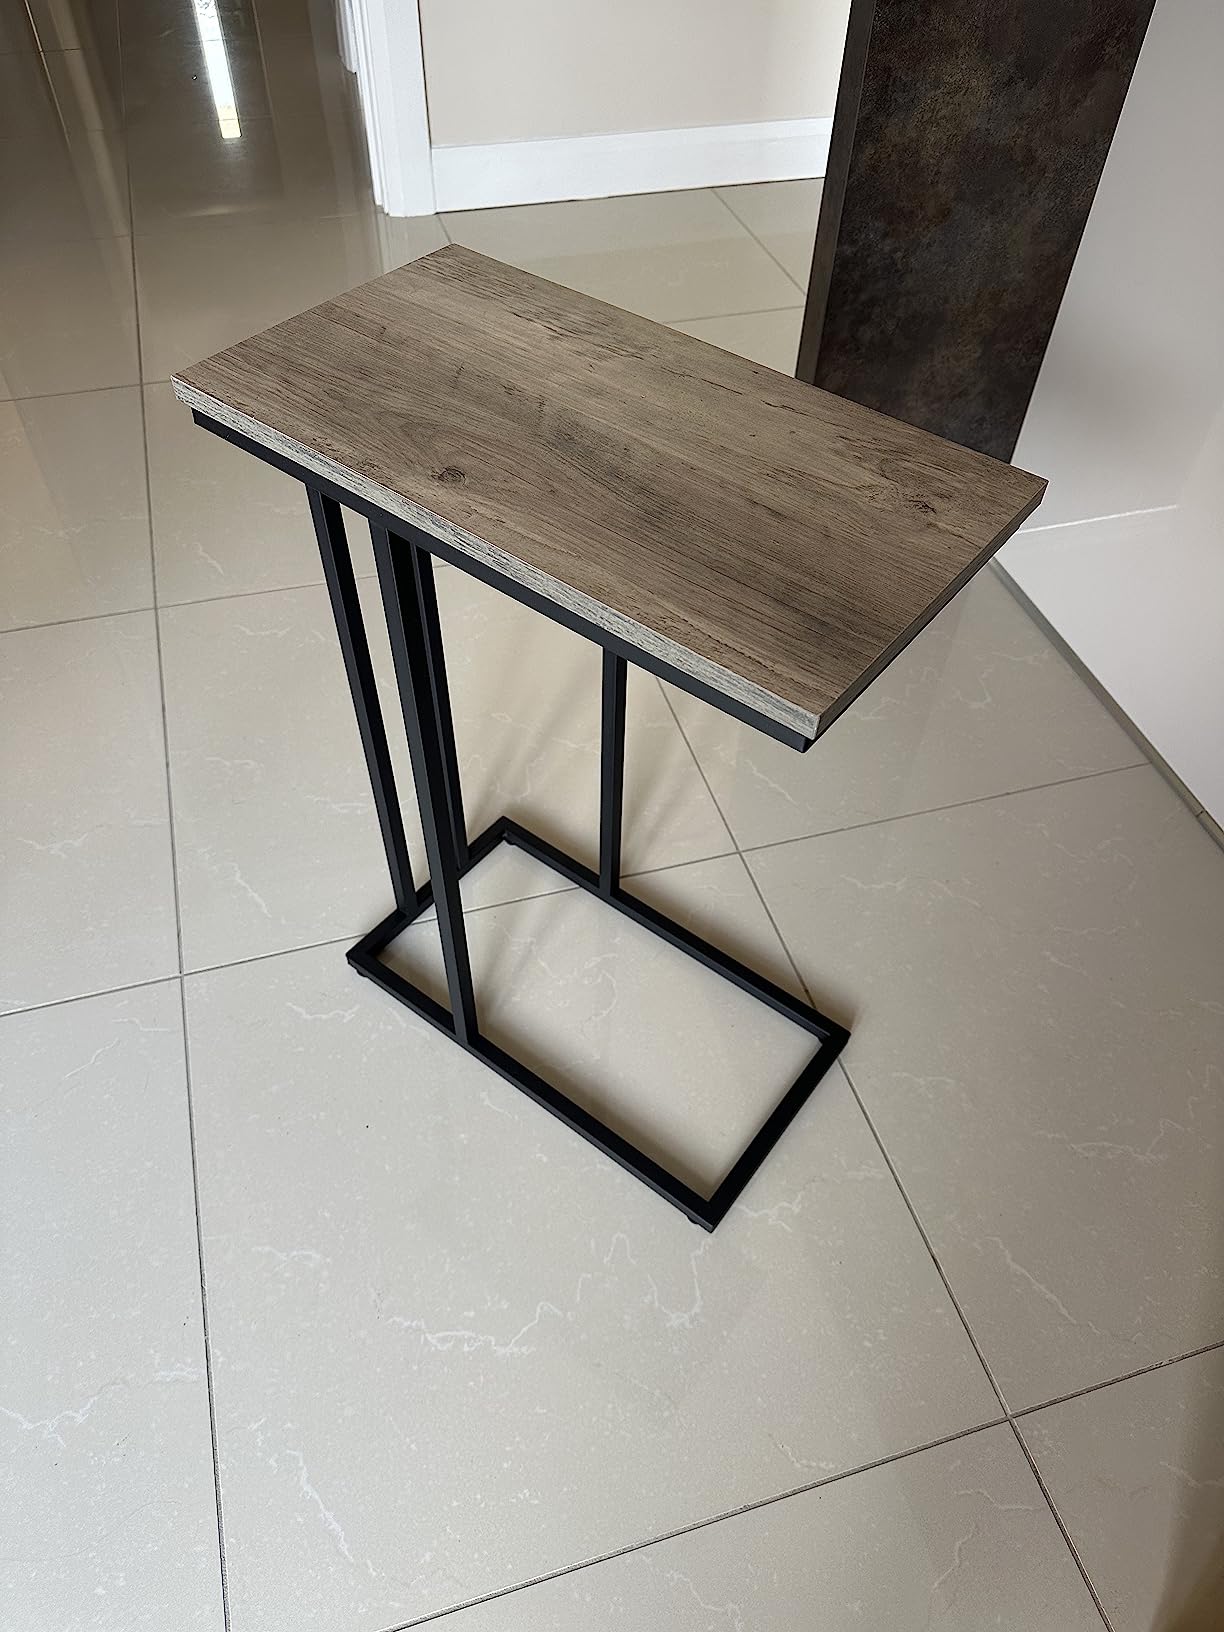 BG02SF01 C Shaped Side Table photo review